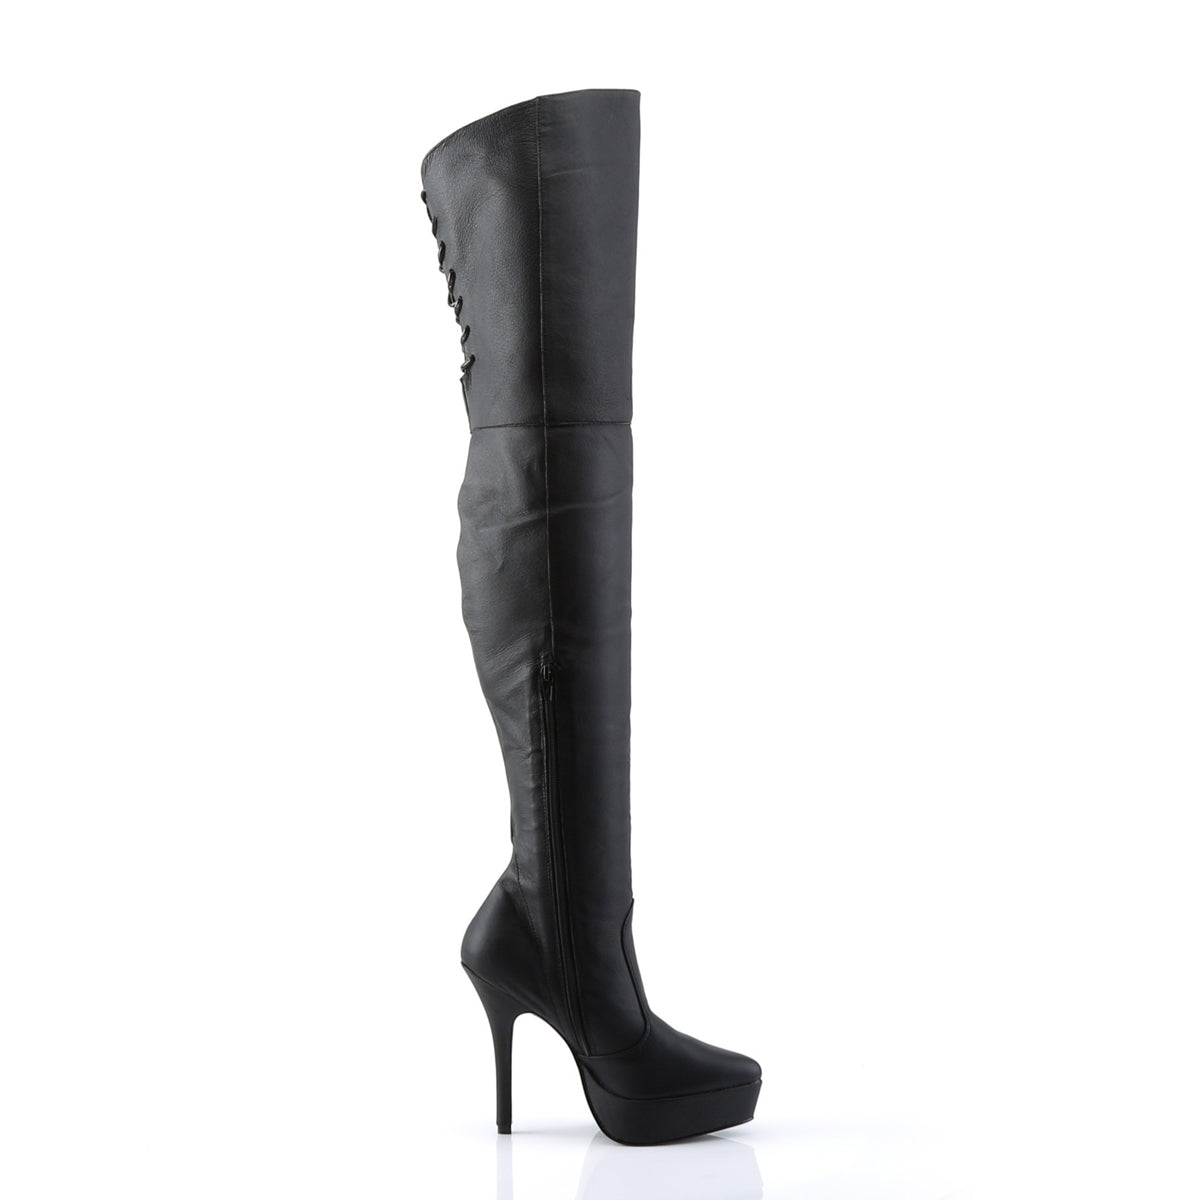 INDULGE 3011 Devious 5" Heel Black Leather Sexy Thigh Boots Devious Heels Fetish Heels